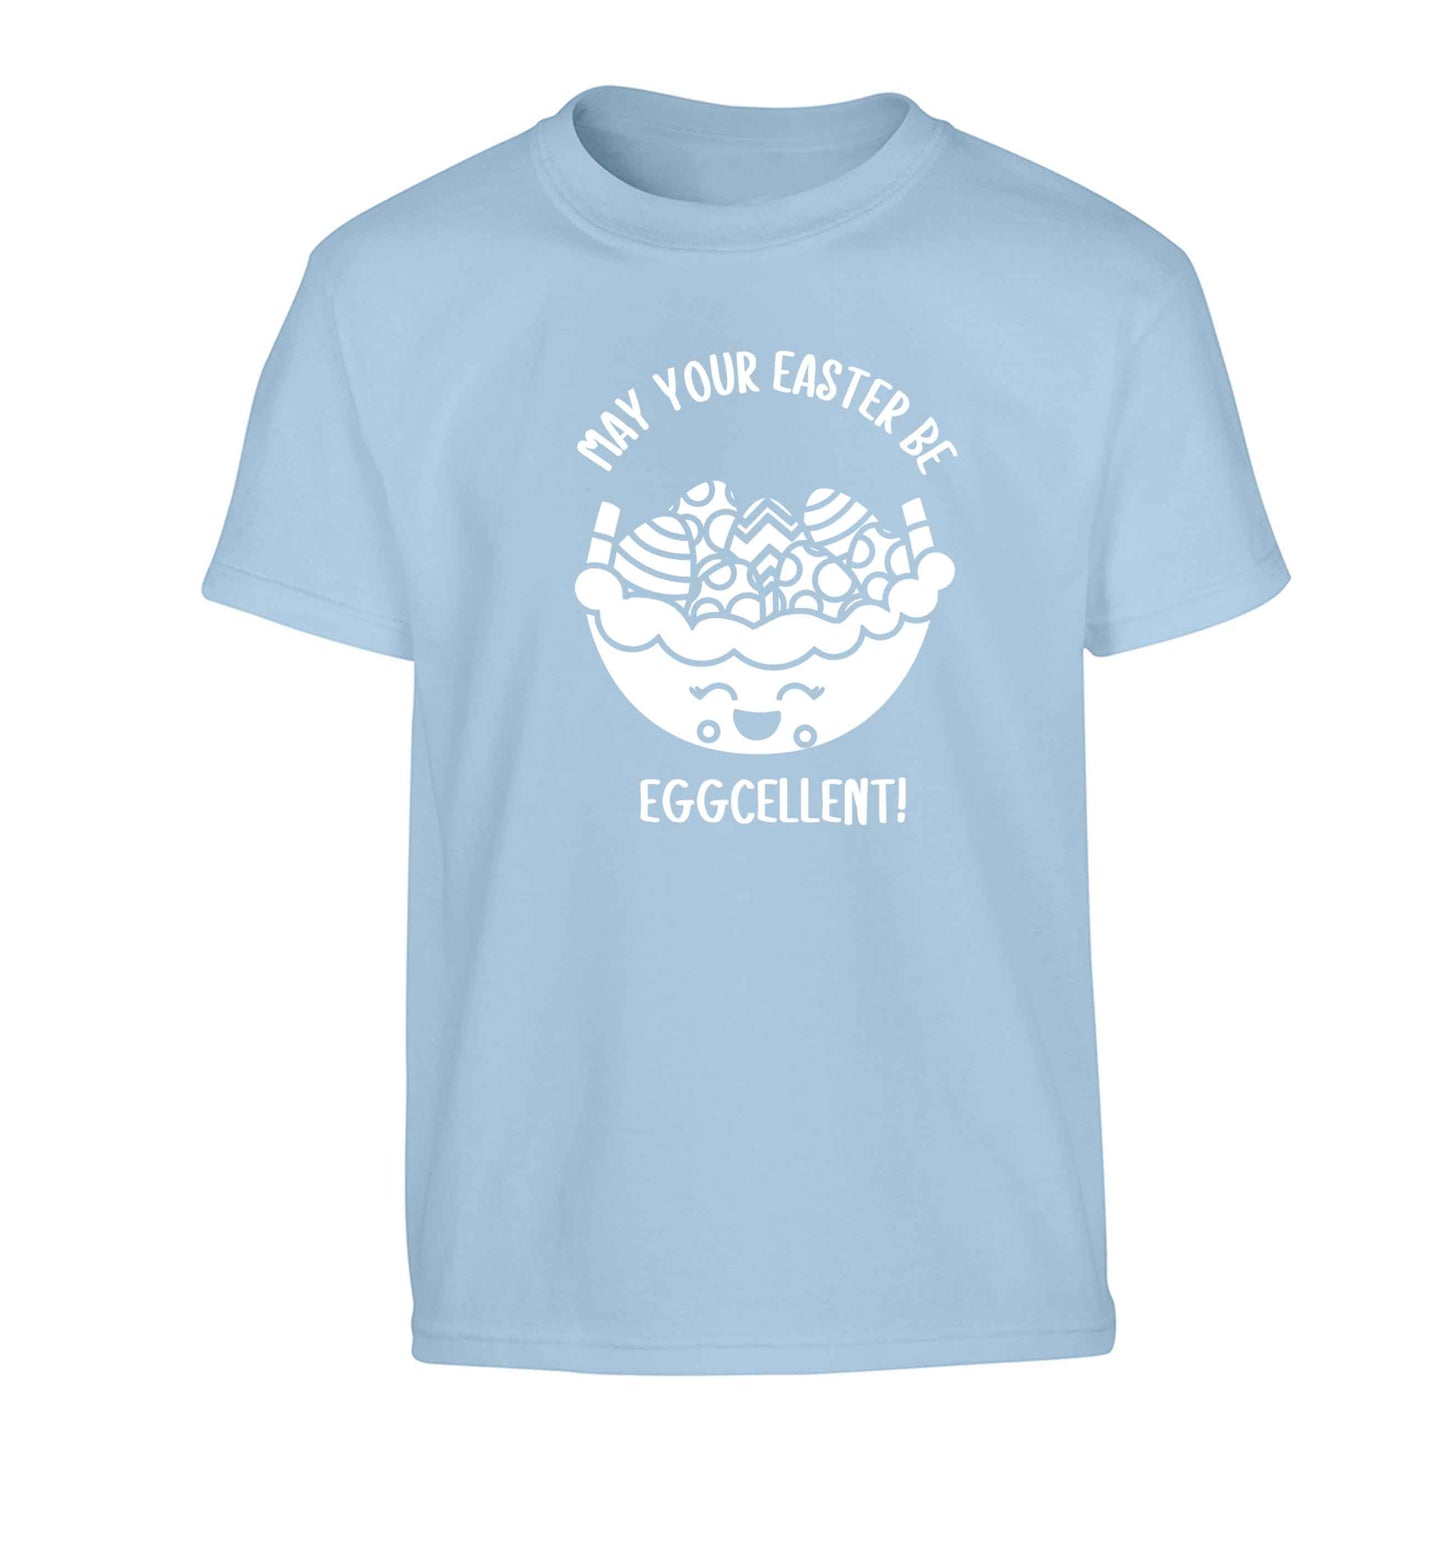 May your Easter be eggcellent Children's light blue Tshirt 12-13 Years